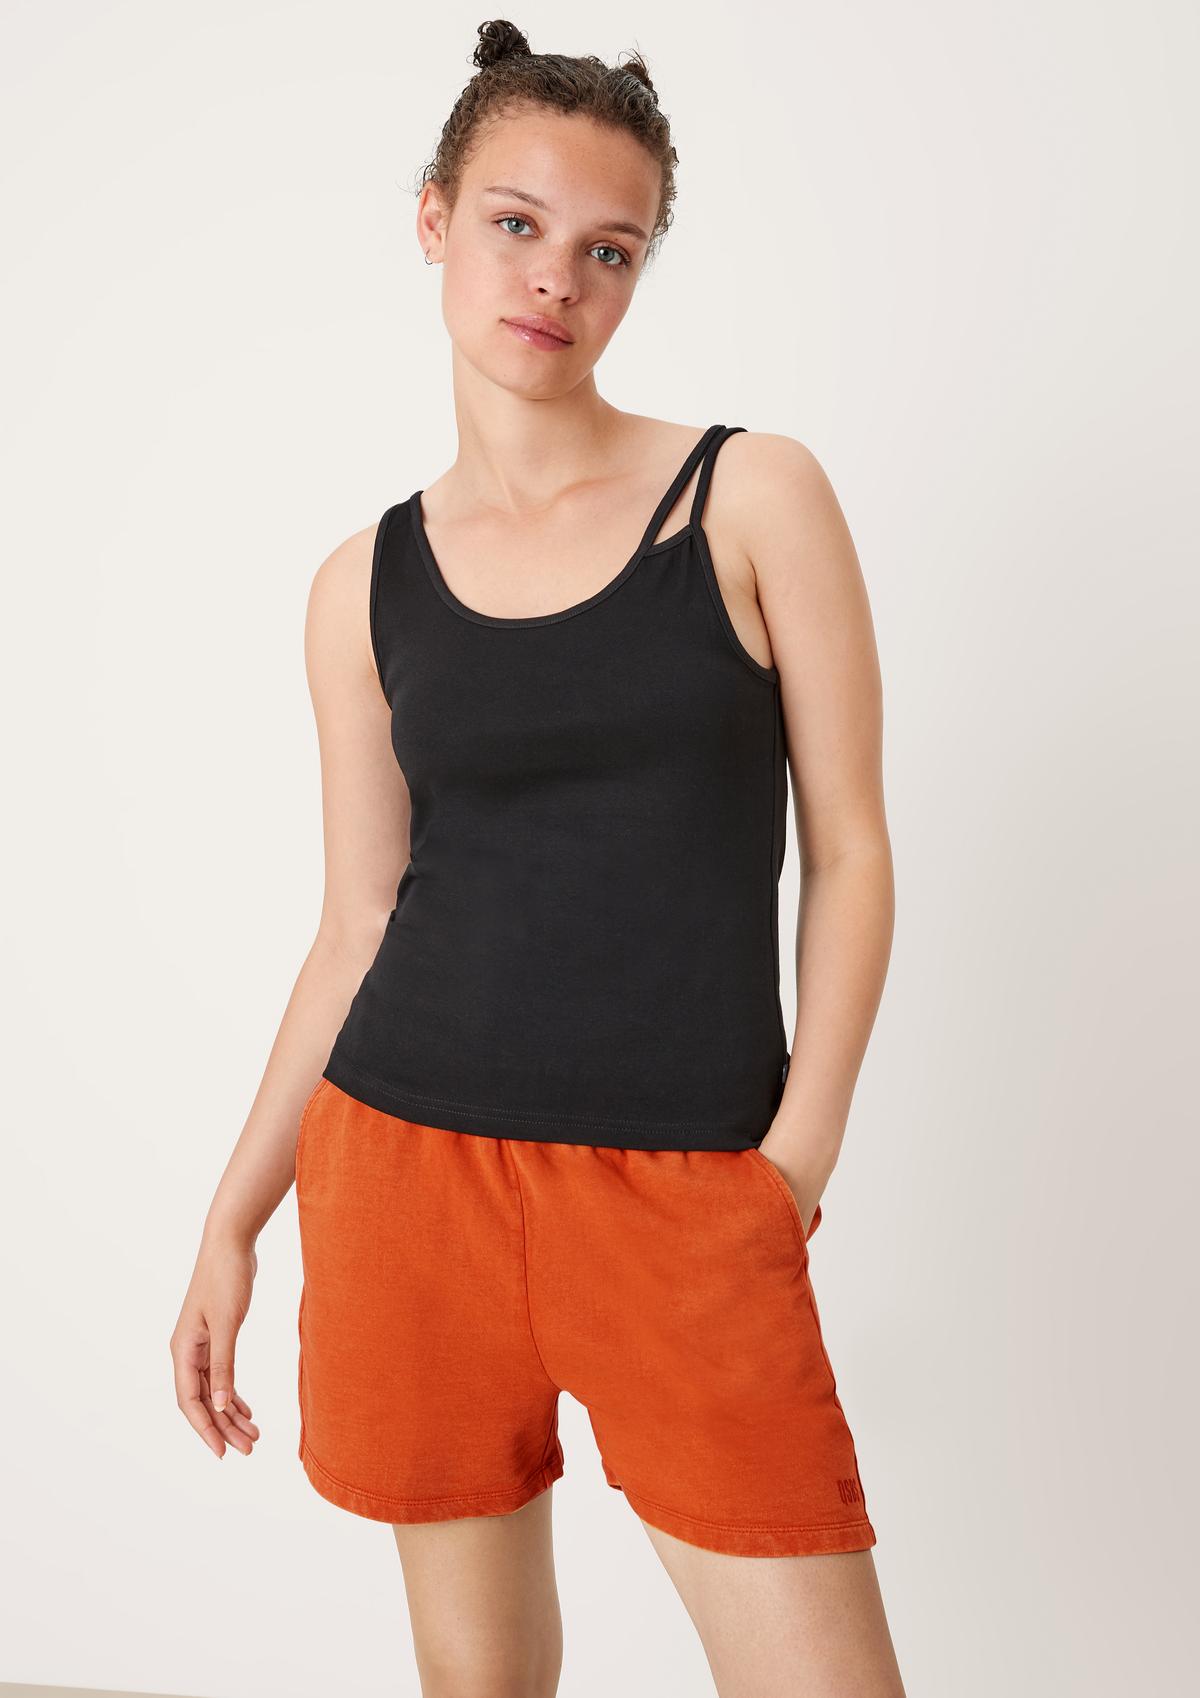 Regular fit: shorts with an elasticated waistband